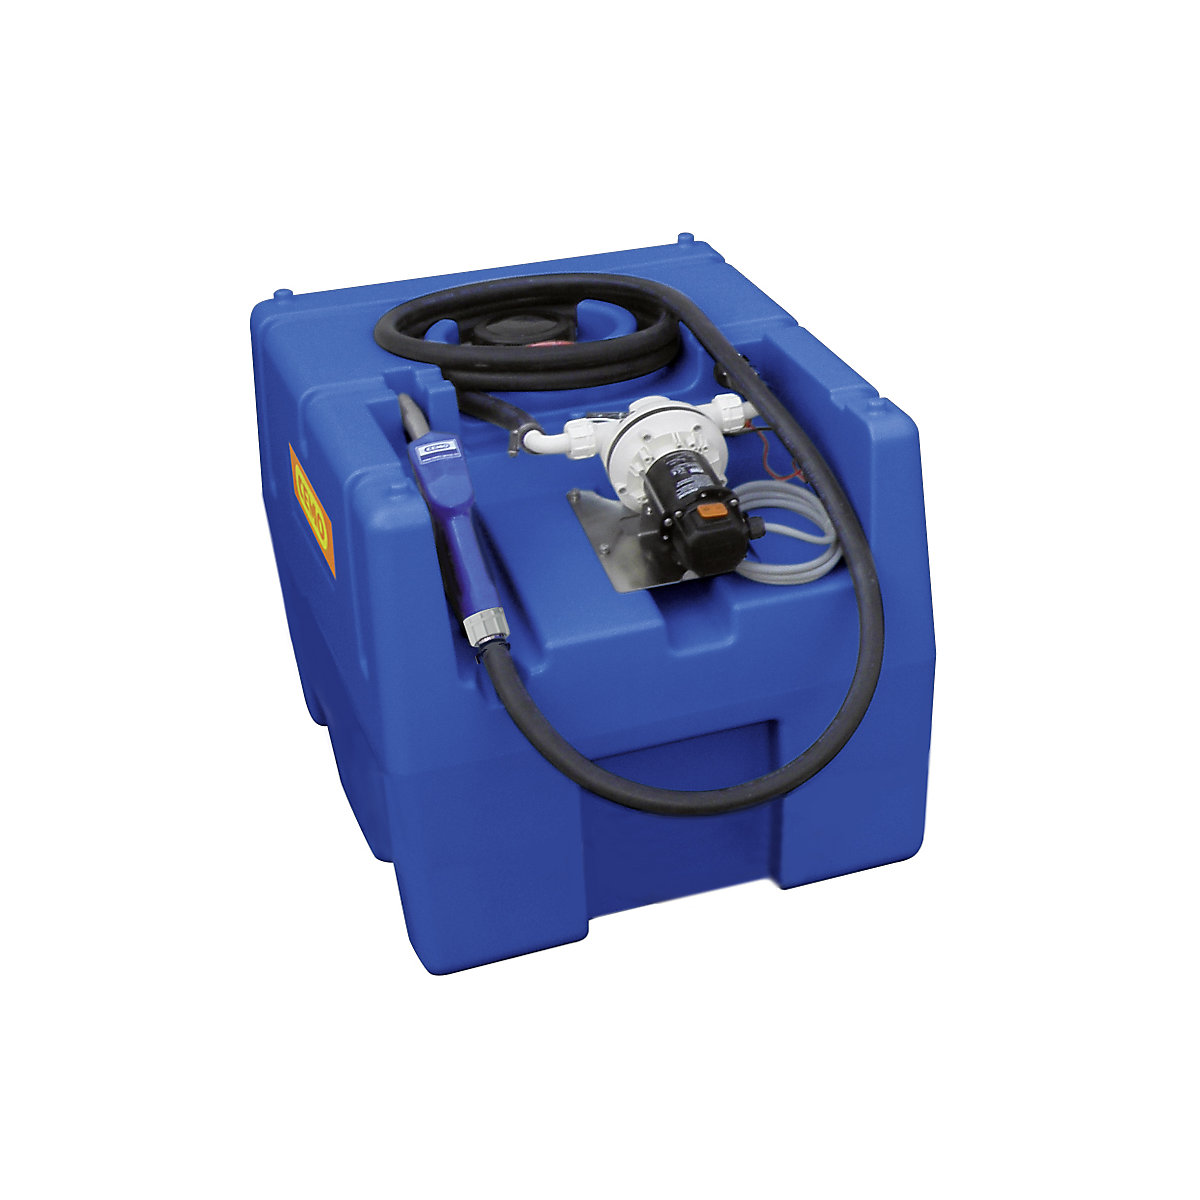 Tank system for AUS 32 (AdBlue®) – CEMO: capacity 200 l, with